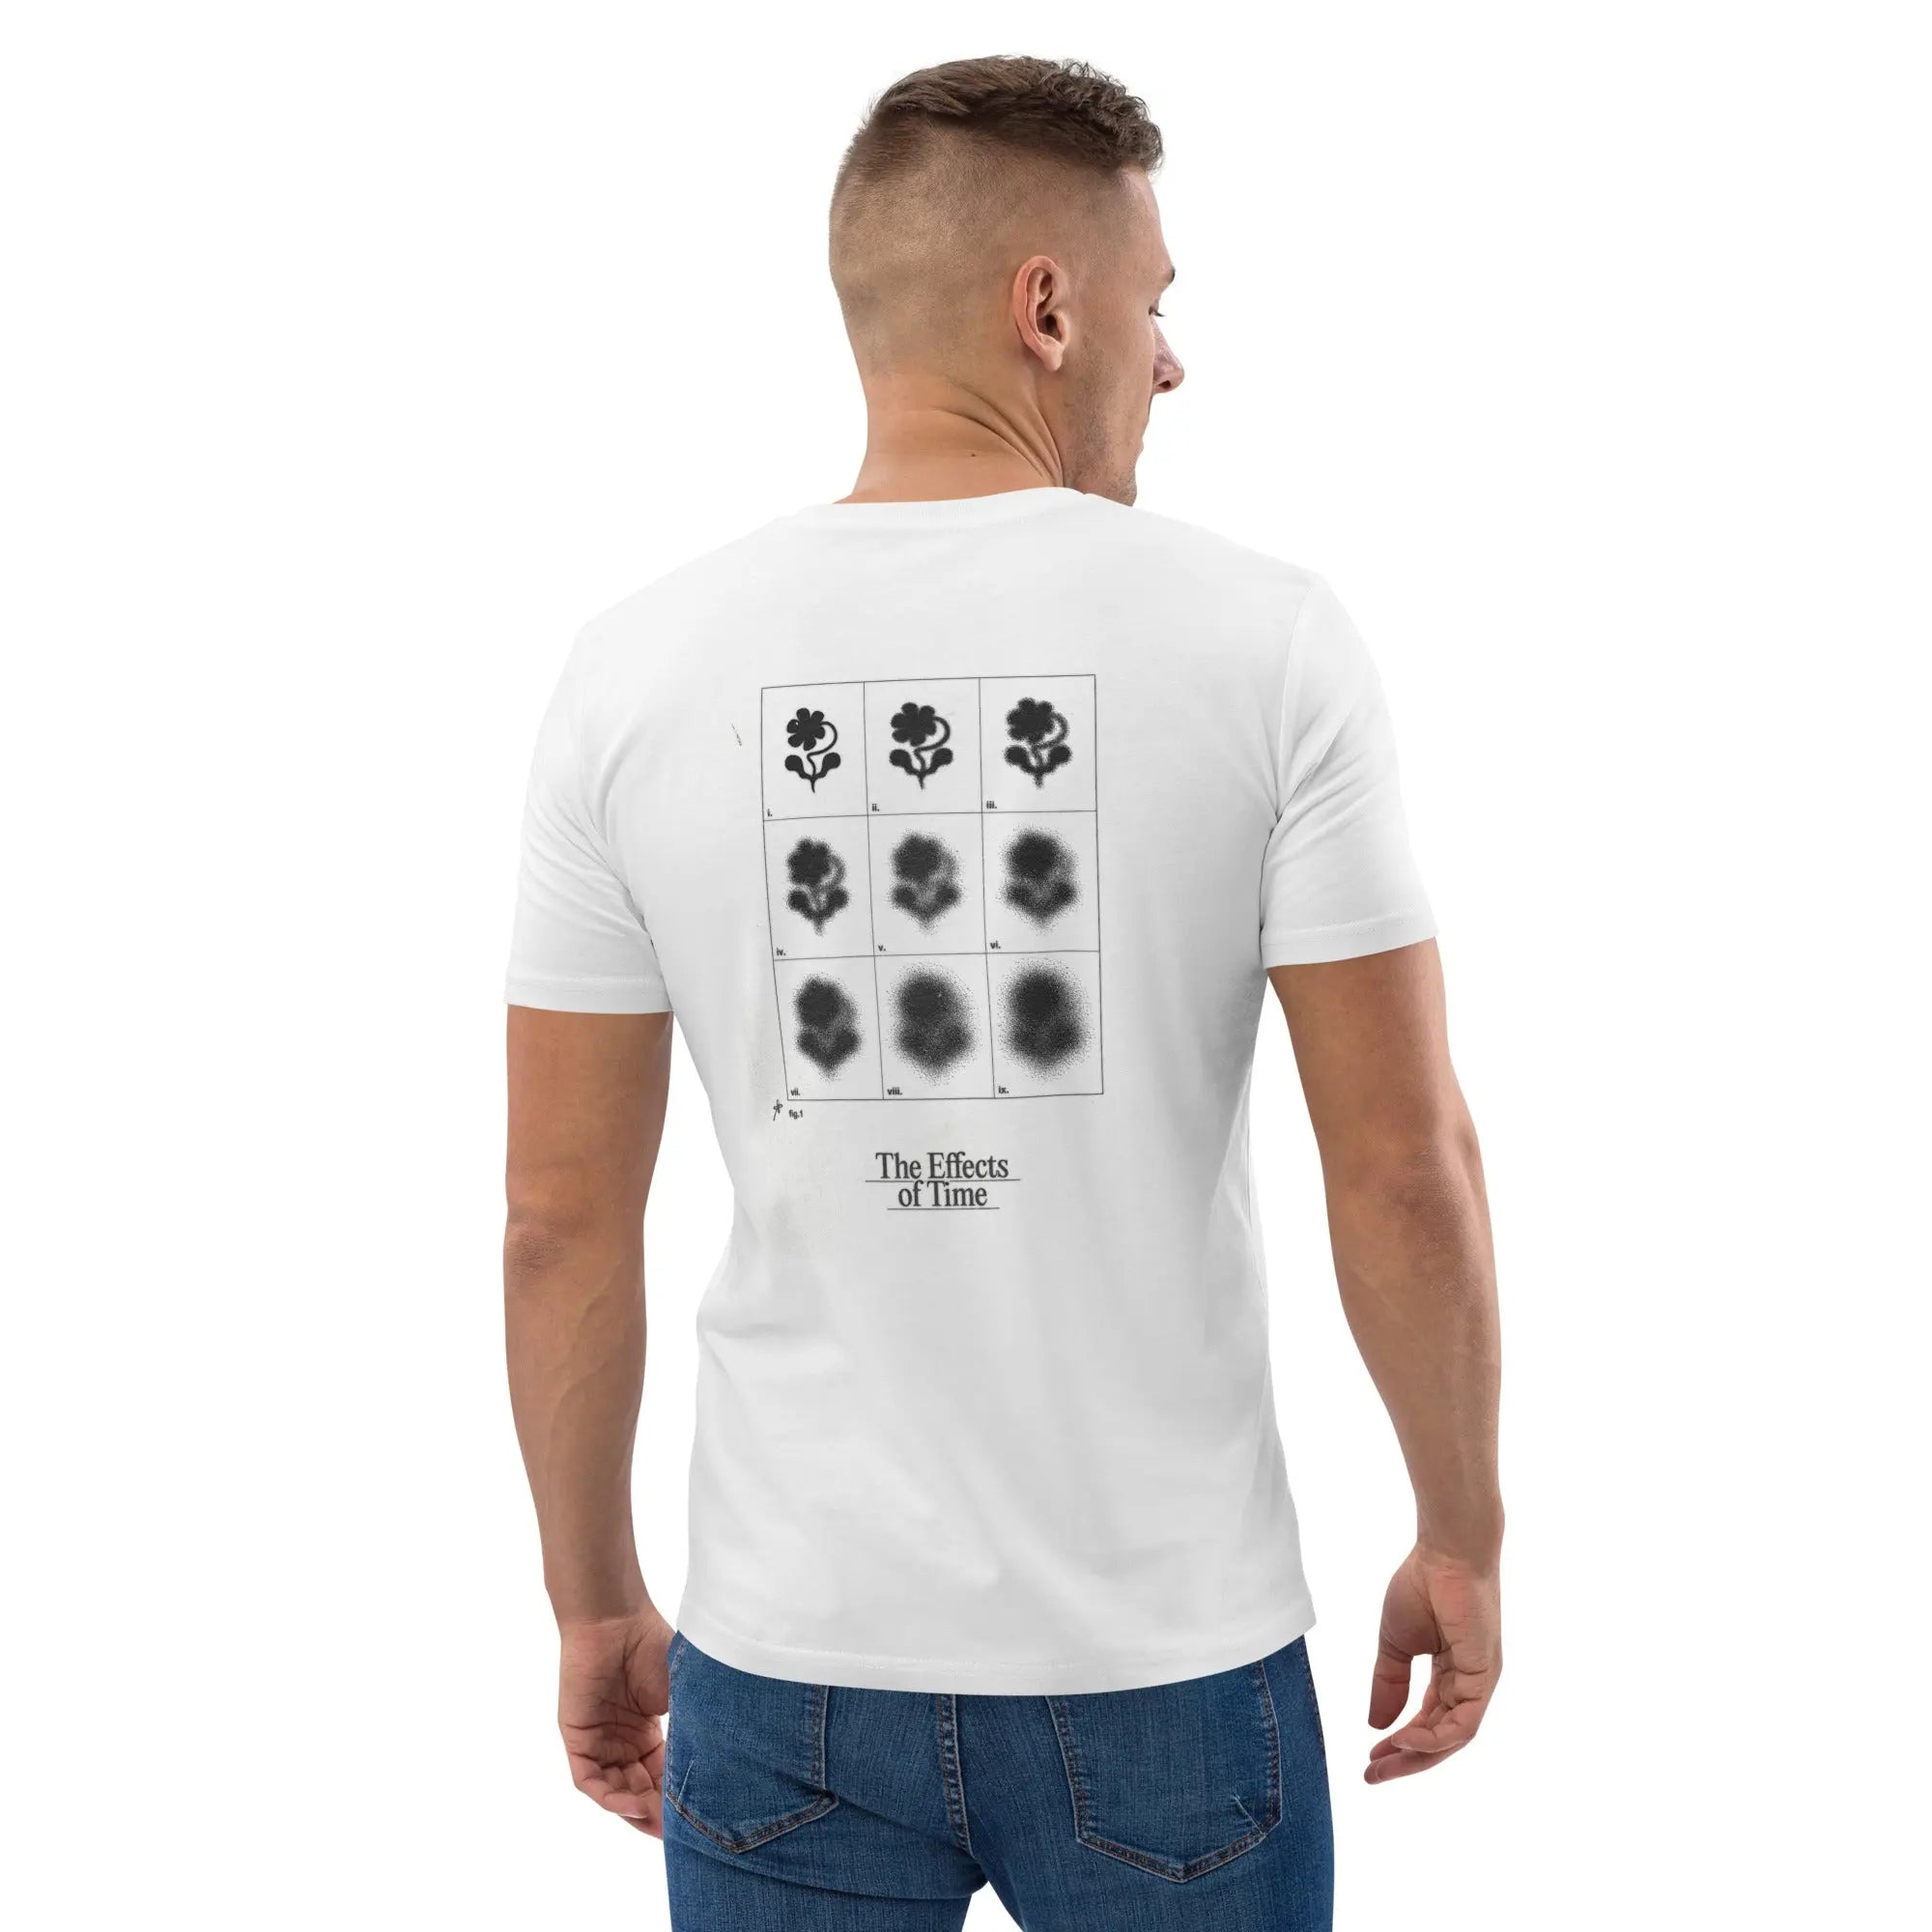 The effect of time cotton t-shirt INVETITUM